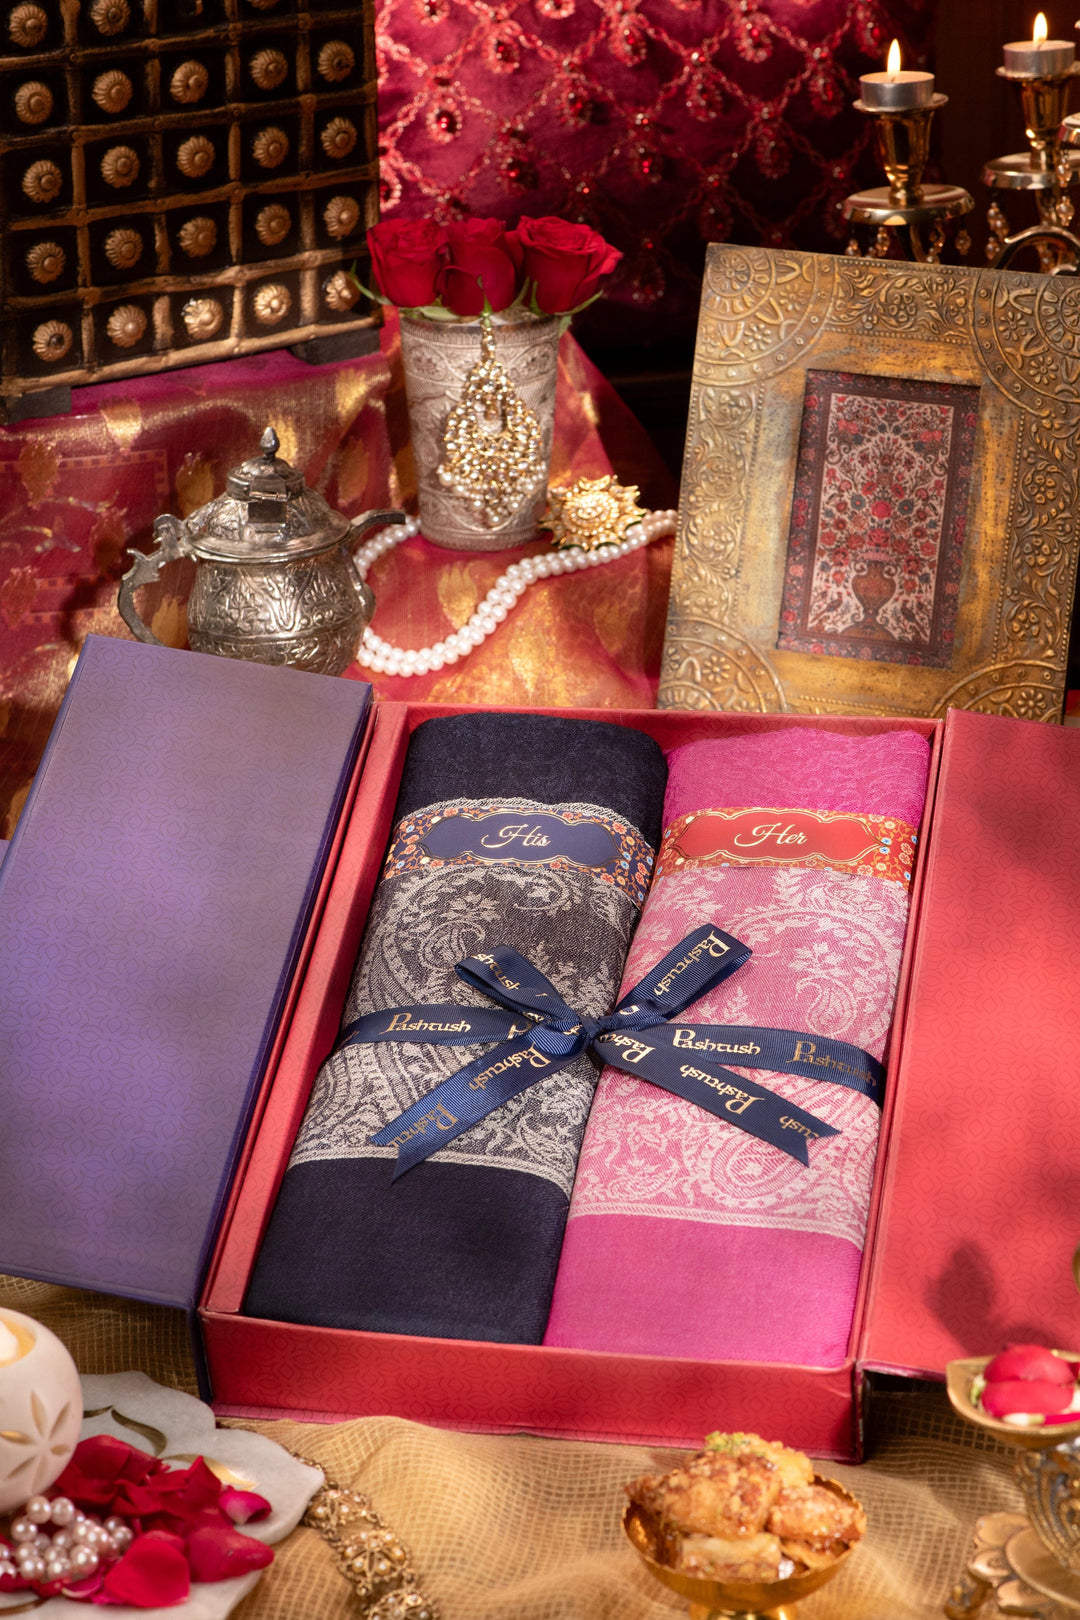 Pashtush India Gift Pack Pashtush His And Her Gift Set Of Reversible Paisley Design Stoles With Premium Gift Box Packaging, Navy Blue and Powder Pink